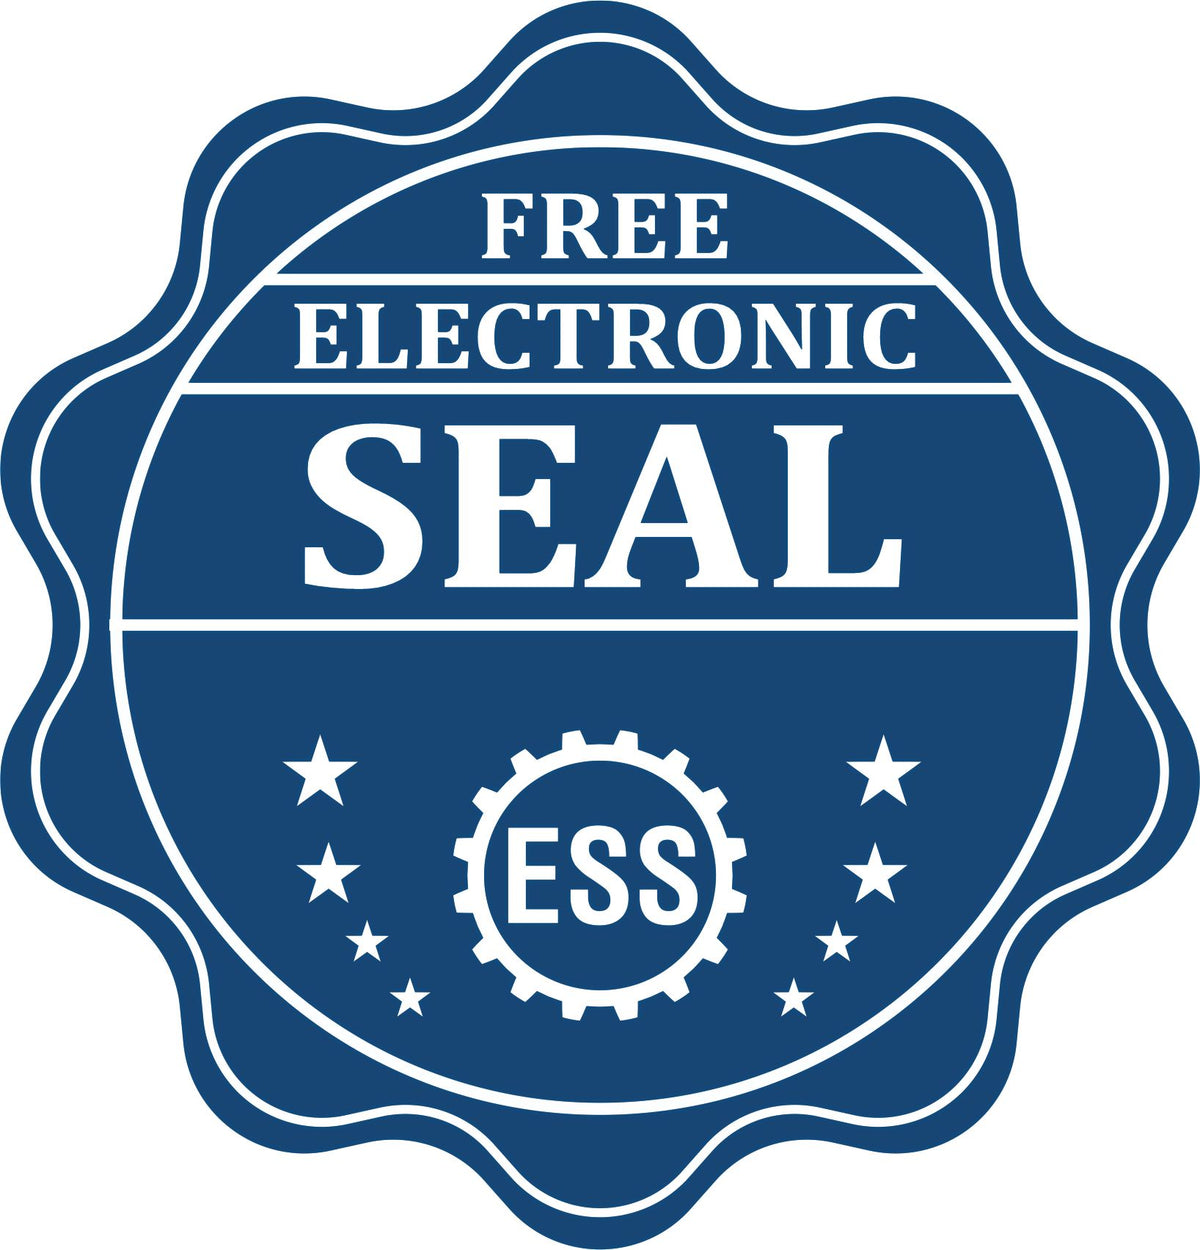 A badge showing a free electronic seal for the Gift Georgia Geologist Seal with stars and the ESS gear on the emblem.